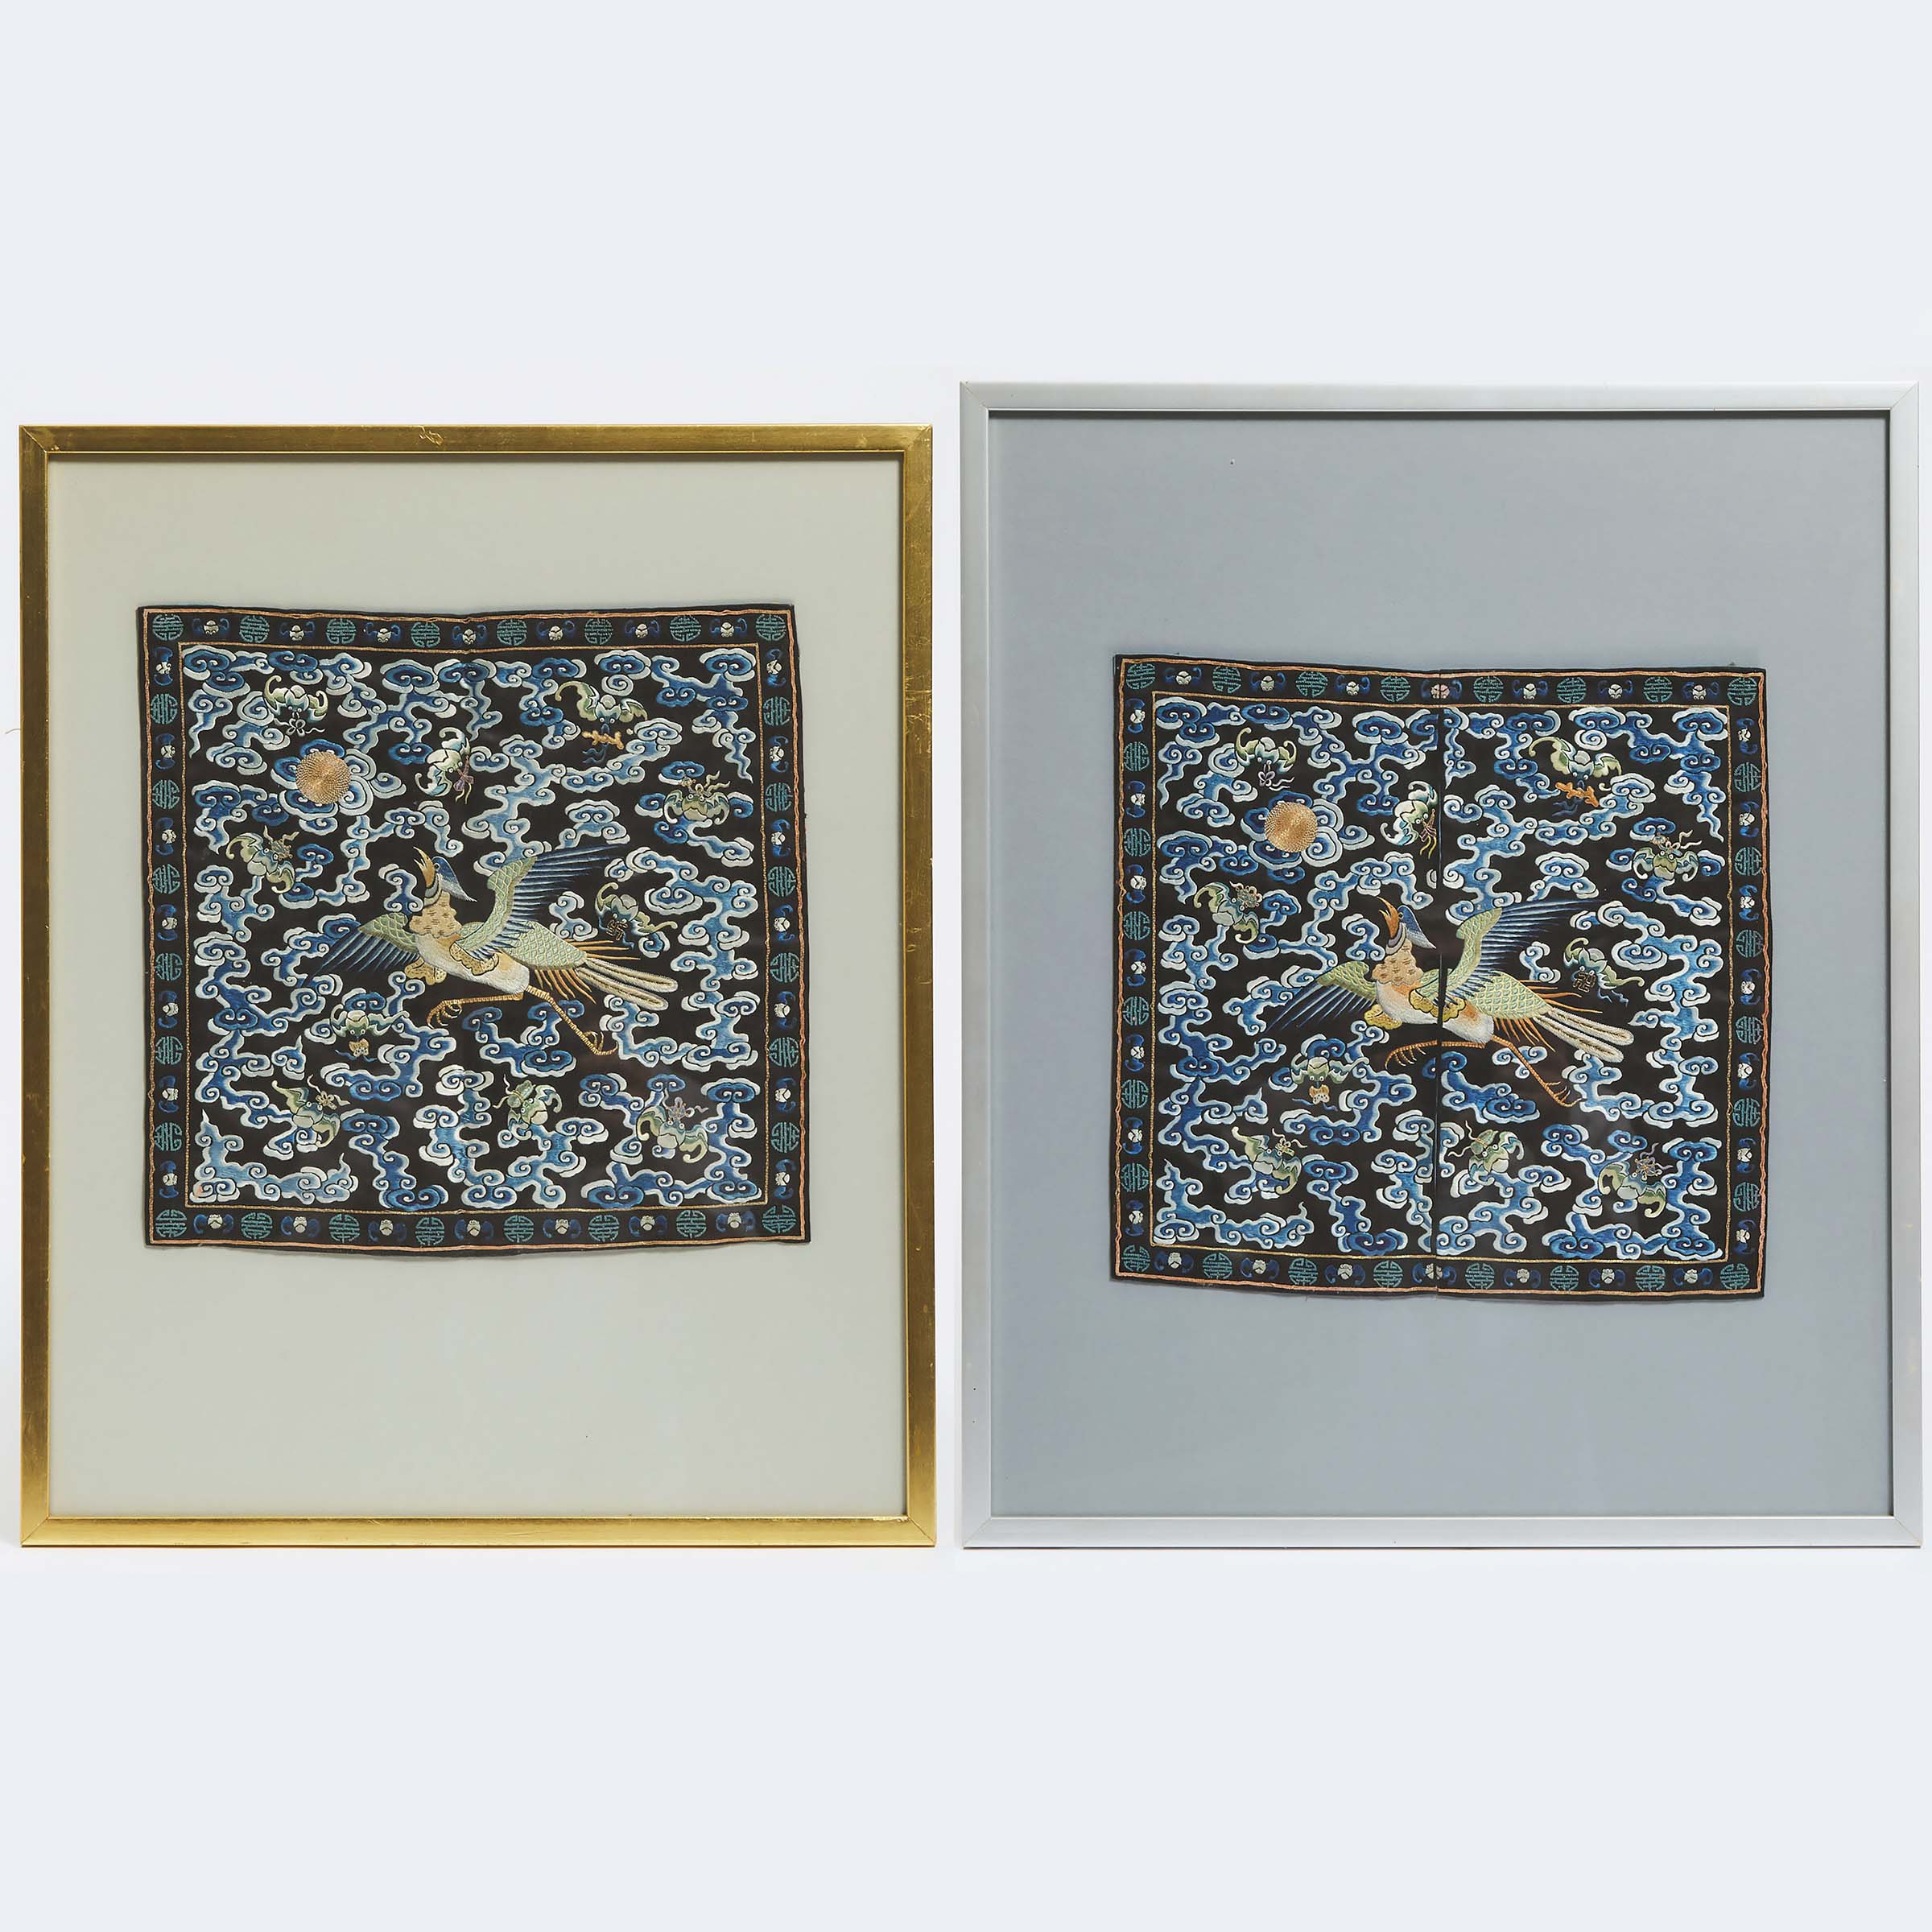 A Pair of Embroidered Official's Rank Badges of Pheasants, Buzi, Qing Dynasty, Late 19th Century